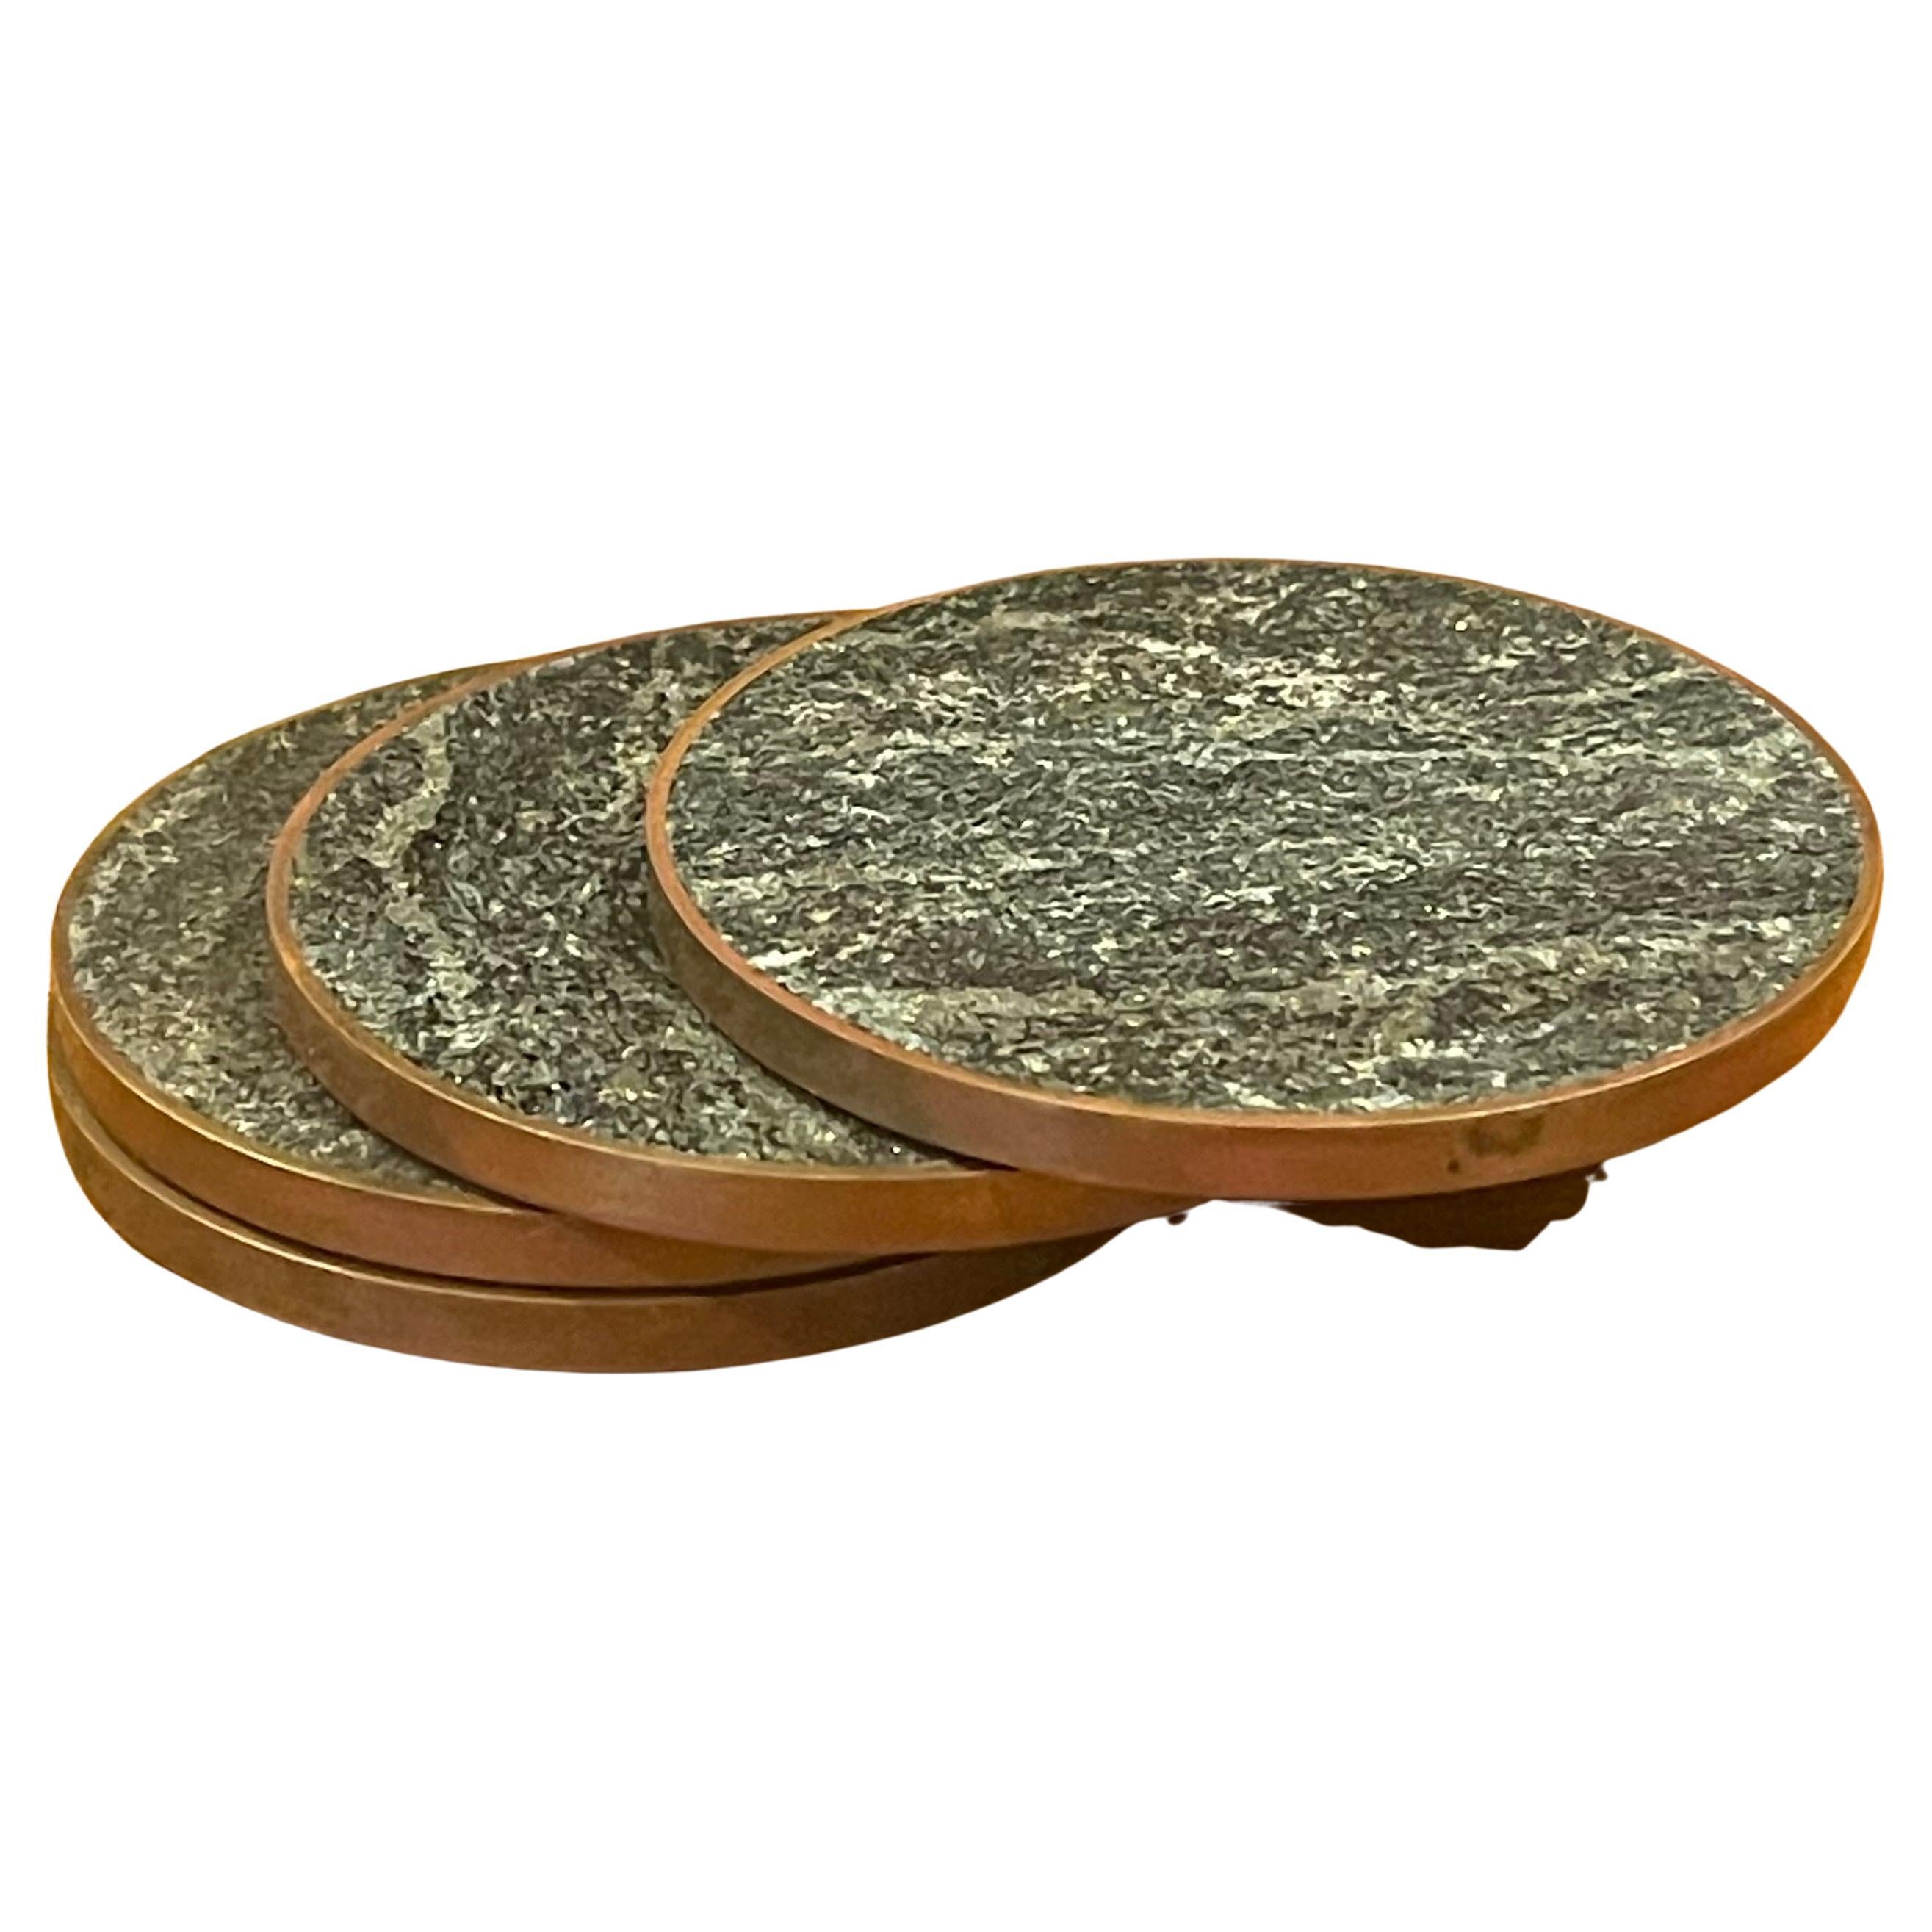 Set of 4 MCM Brass and Marble Coasters by Saulo for Sulitjelma Stein Og Metall For Sale 3